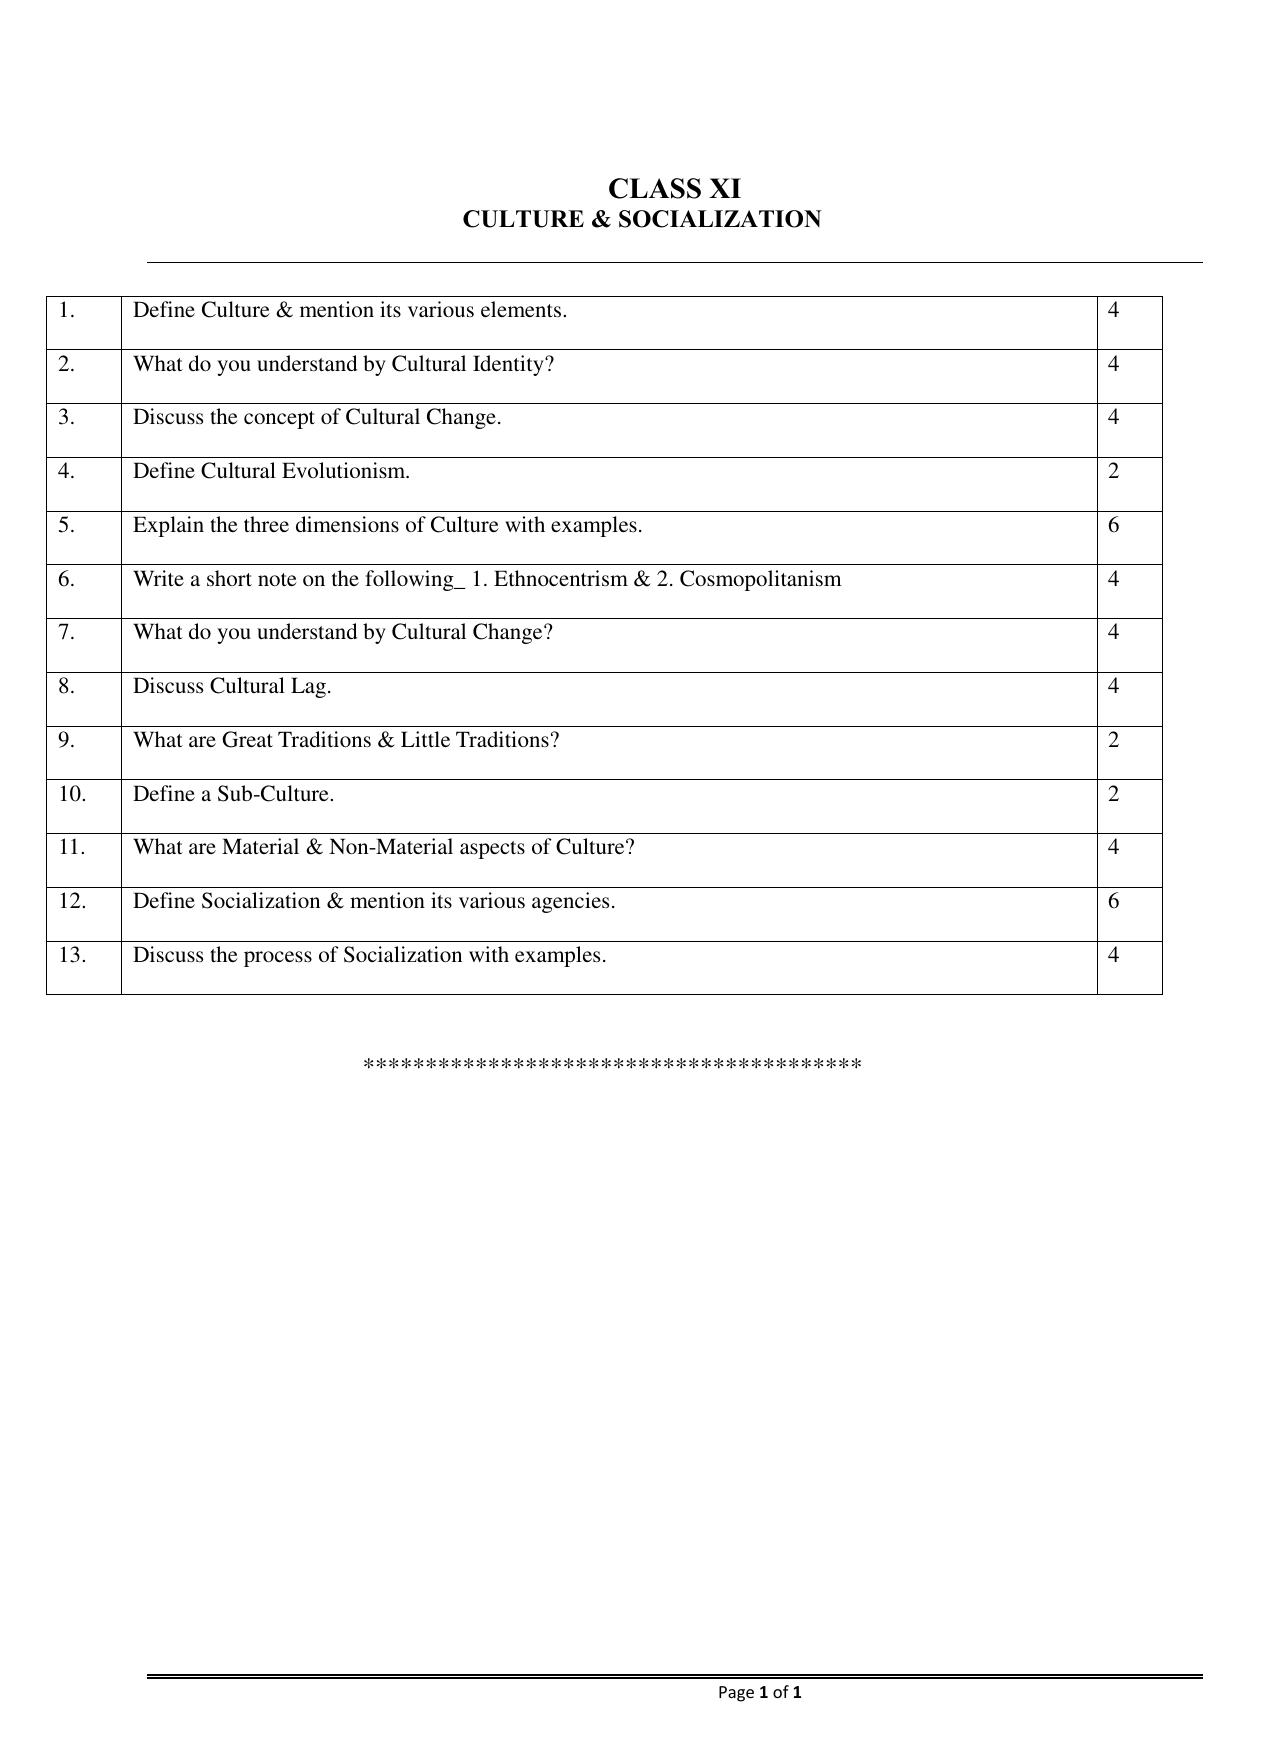 CBSE Worksheets for Class 11 Sociology Culture & Socialization Assignment - Page 1